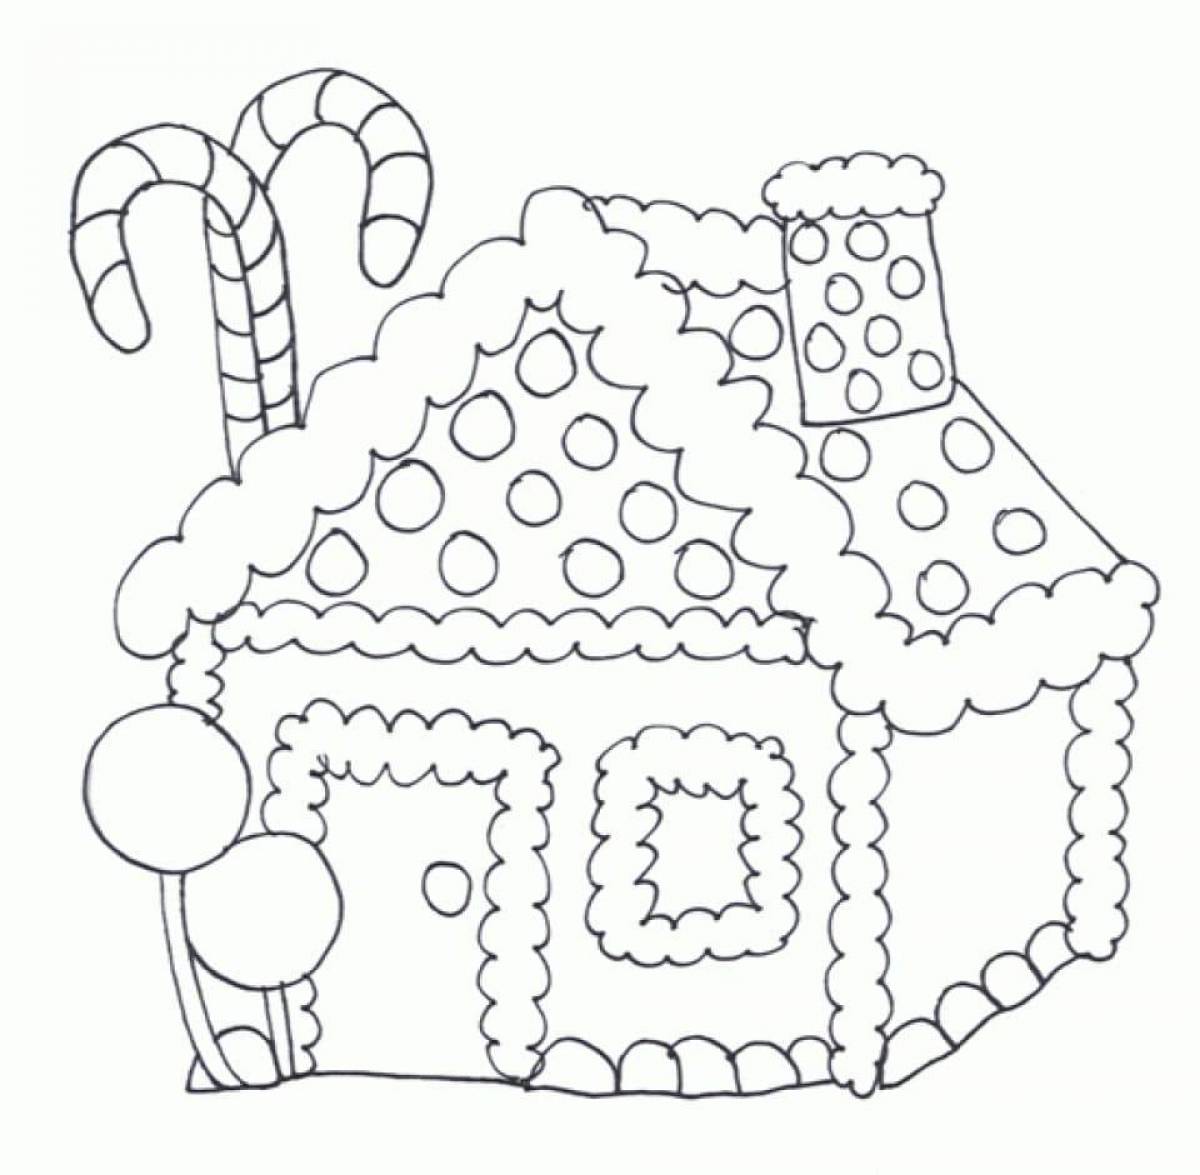 Glamorous gingerbread house coloring page